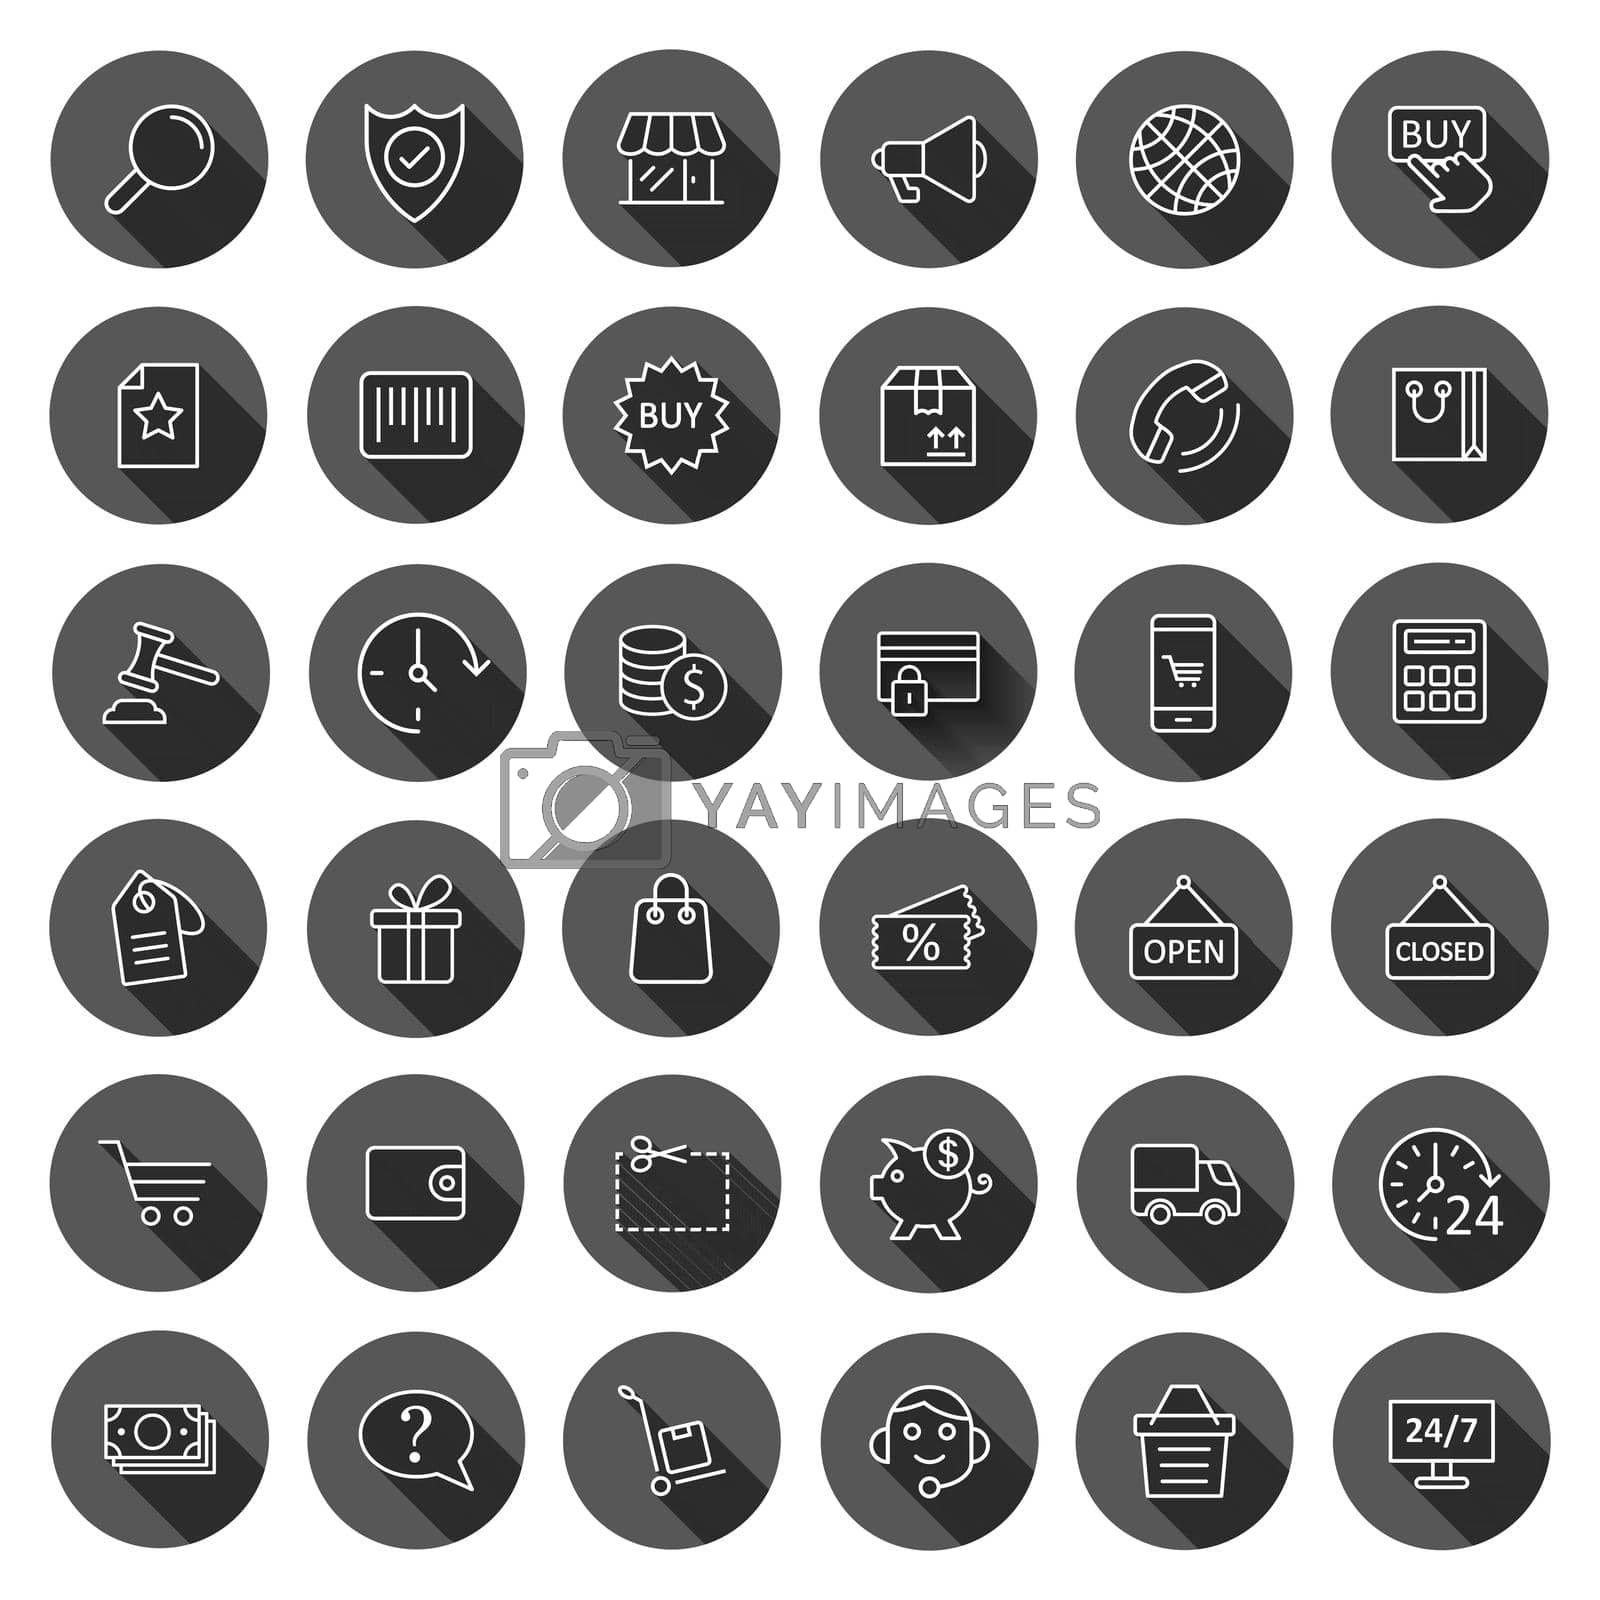 Royalty free image of Shopping icon set in flat style. Online commerce vector illustration on black round background with long shadow effect. Market store circle button business concept. by LysenkoA